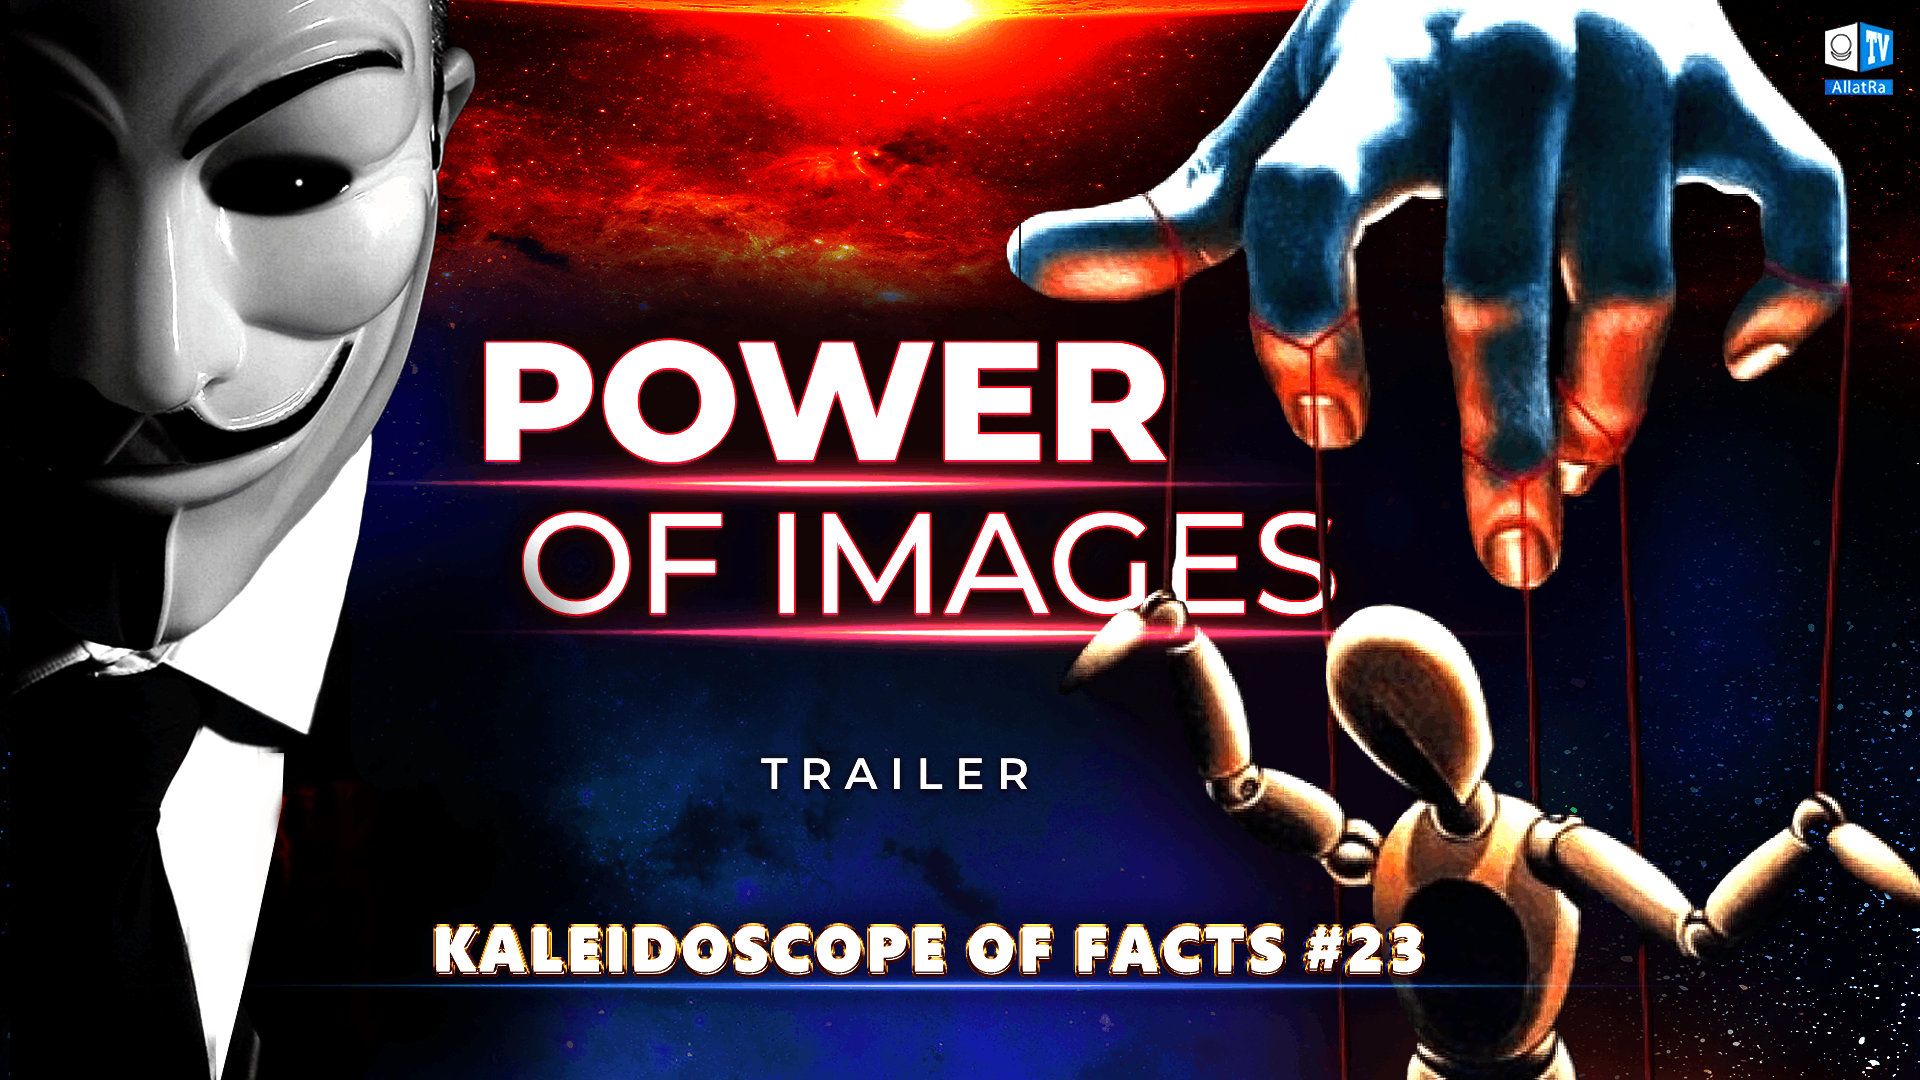 Power of Images | Trailer | Kaleidoscope of Facts 23